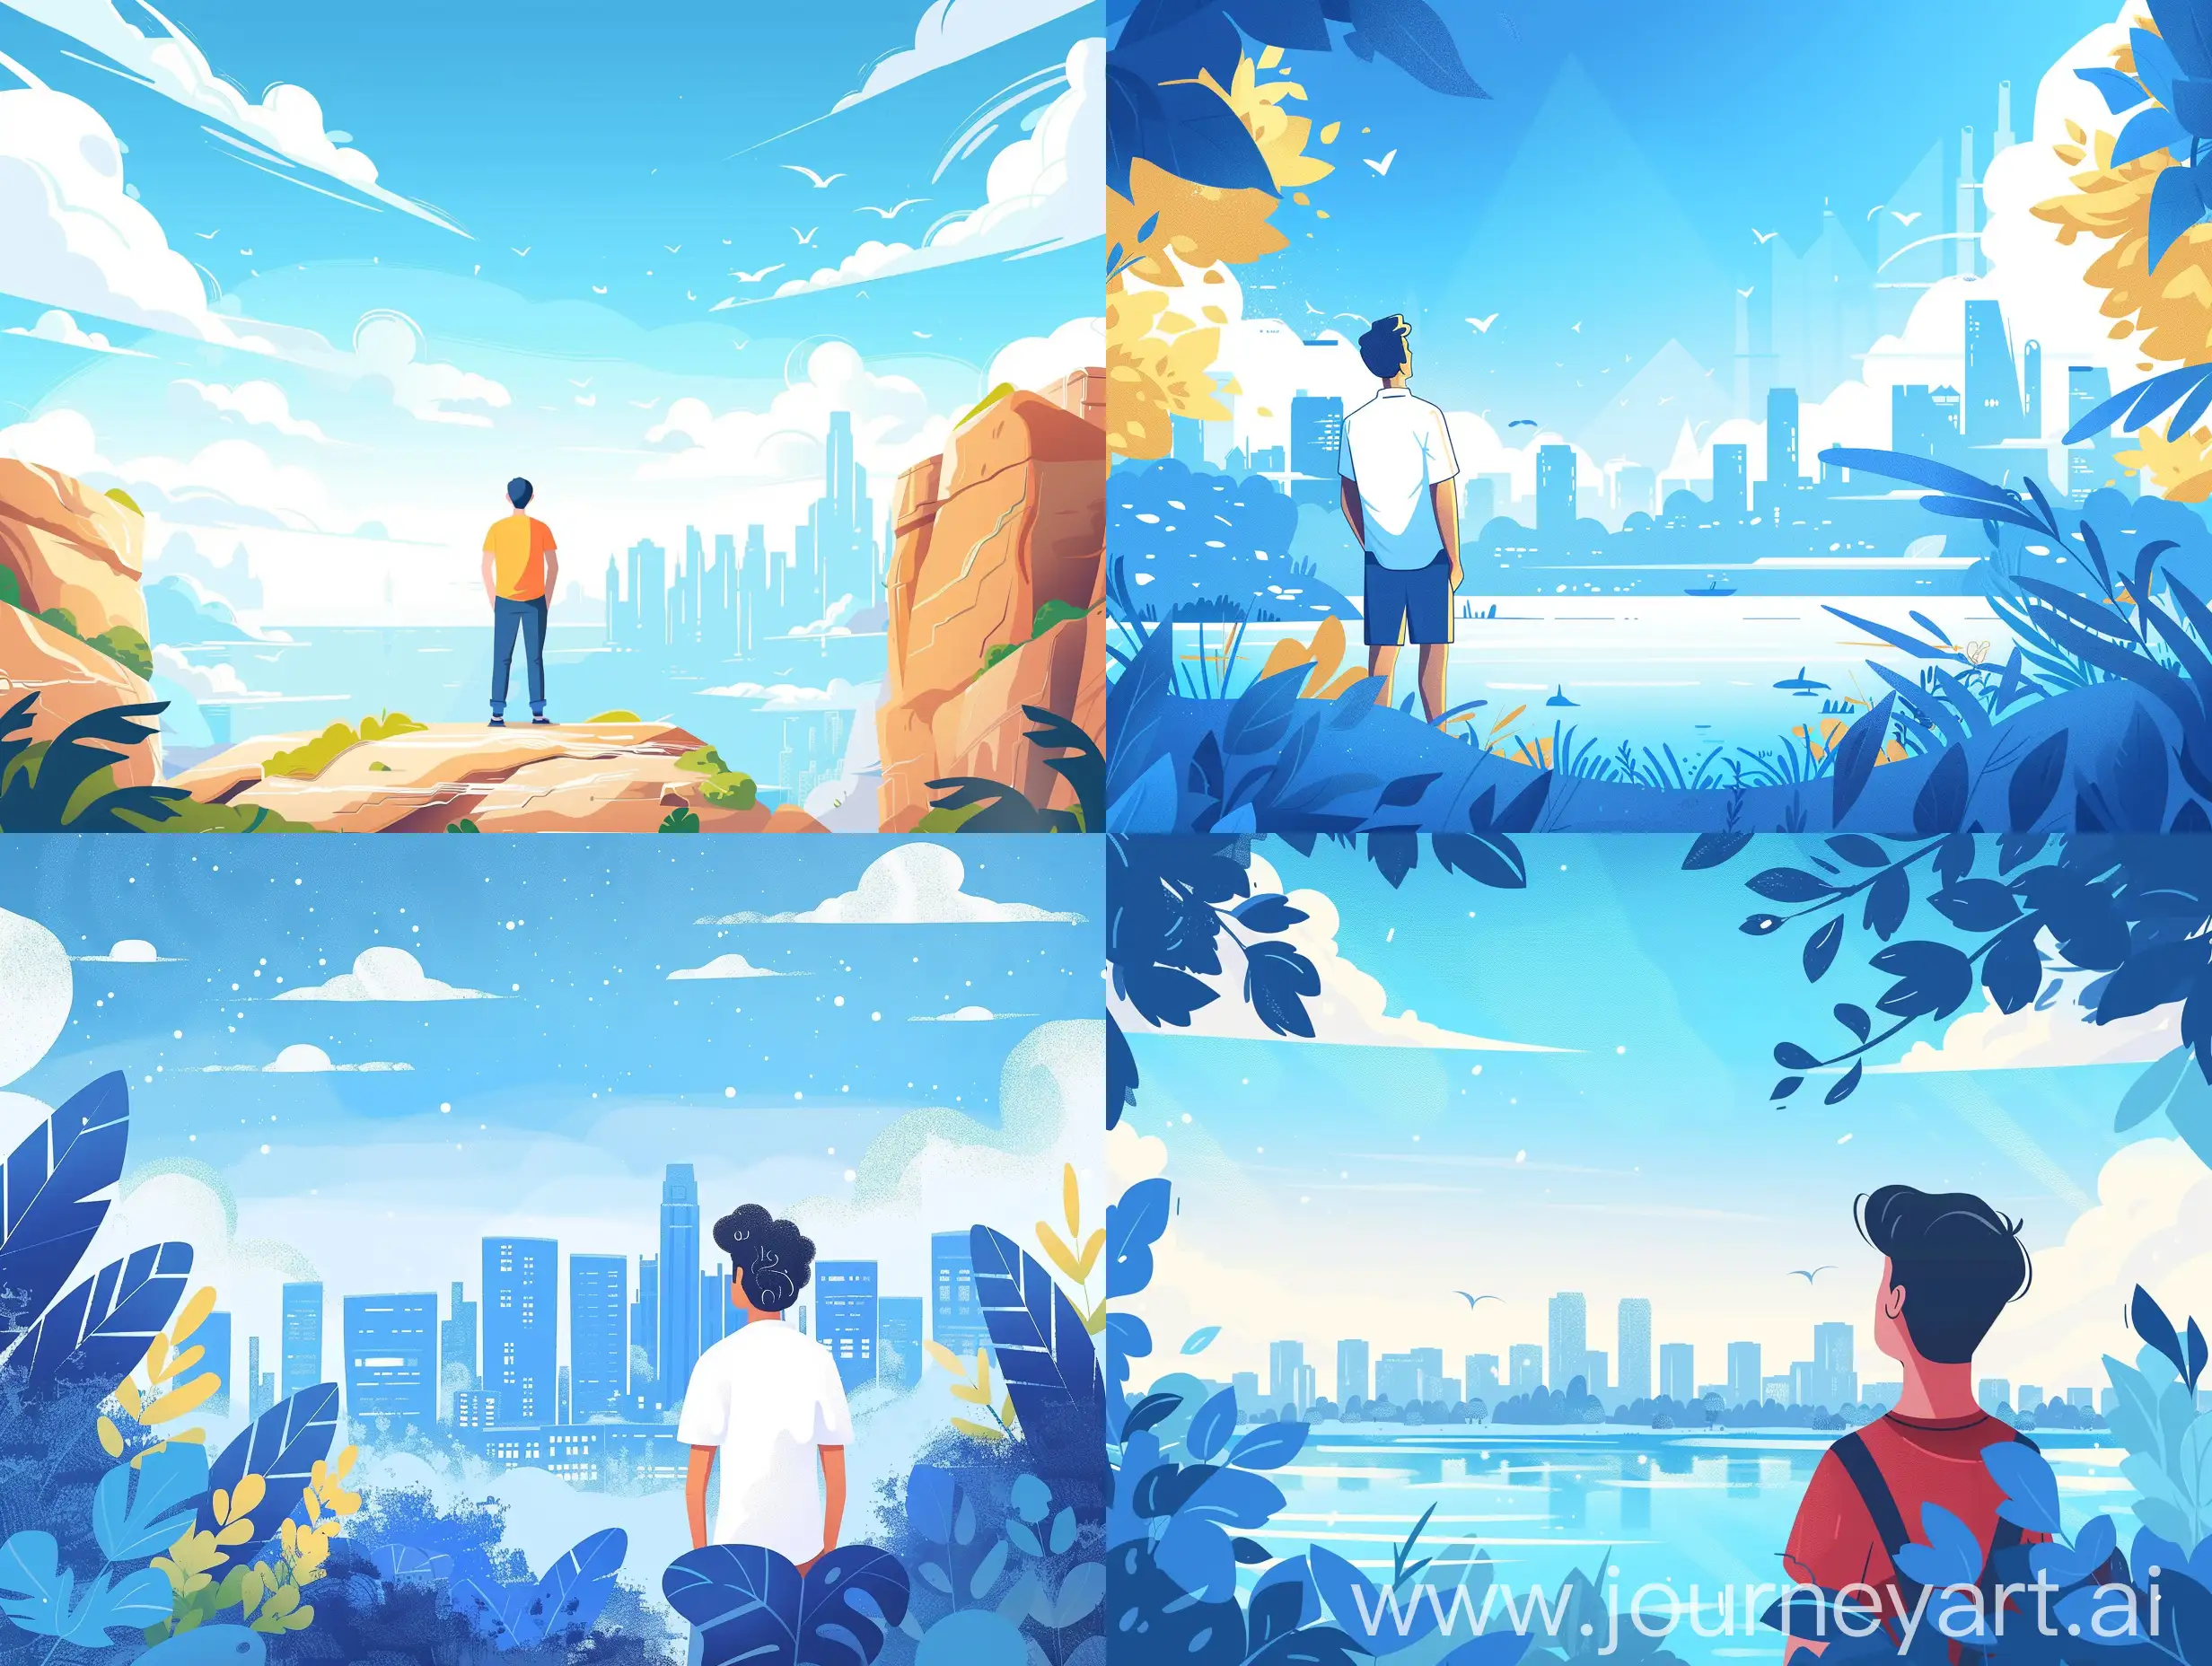 Create a captivating cartoon illustration of a man gazing towards the city in awe, surrounded by the beauty of nature blue sky